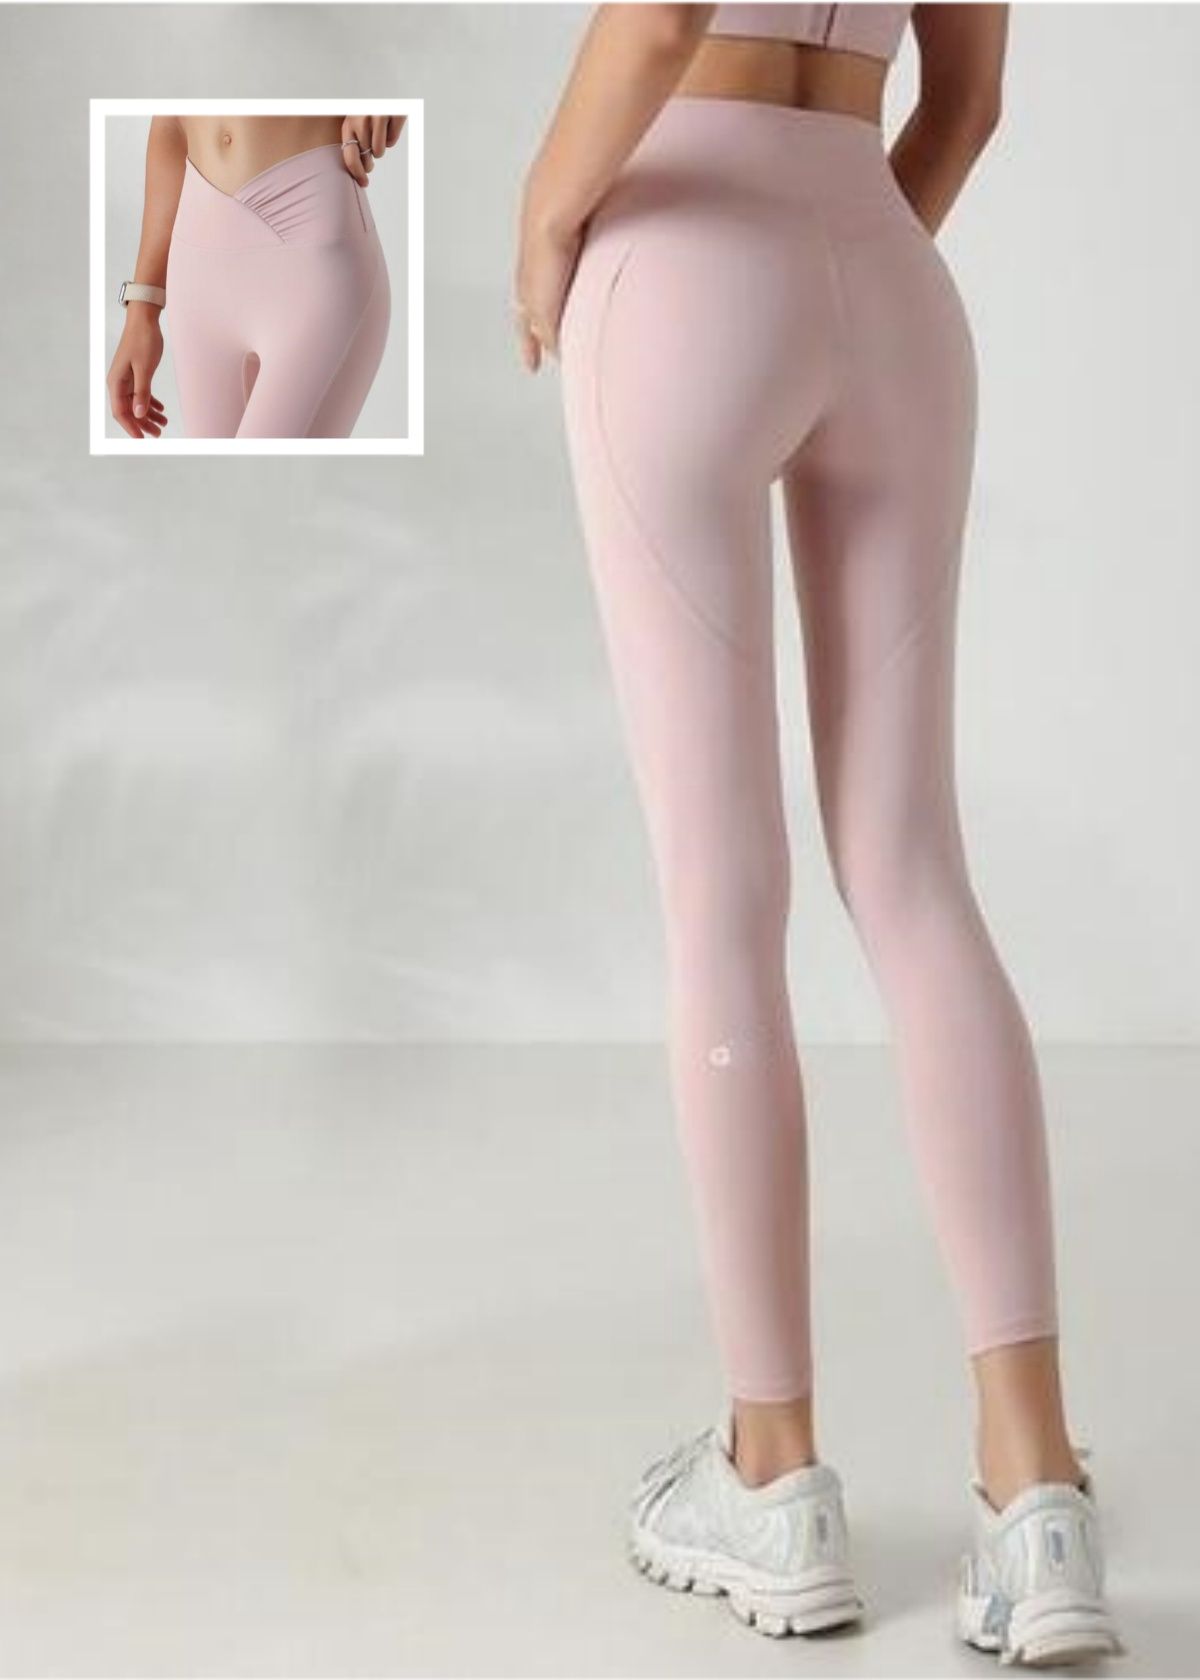 Pants style#2,pink